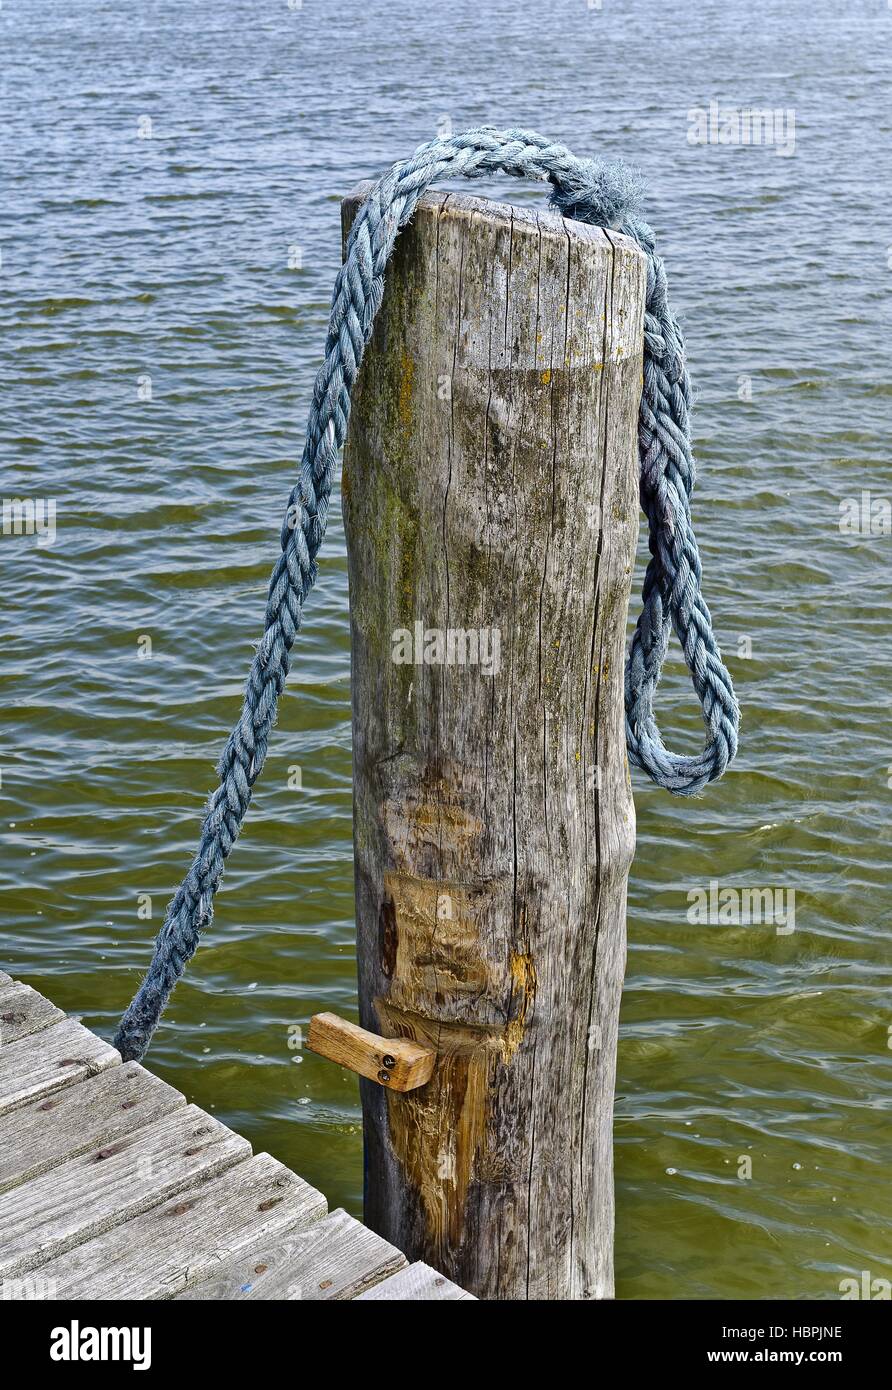 wooden stake and blue rope Stock Photo